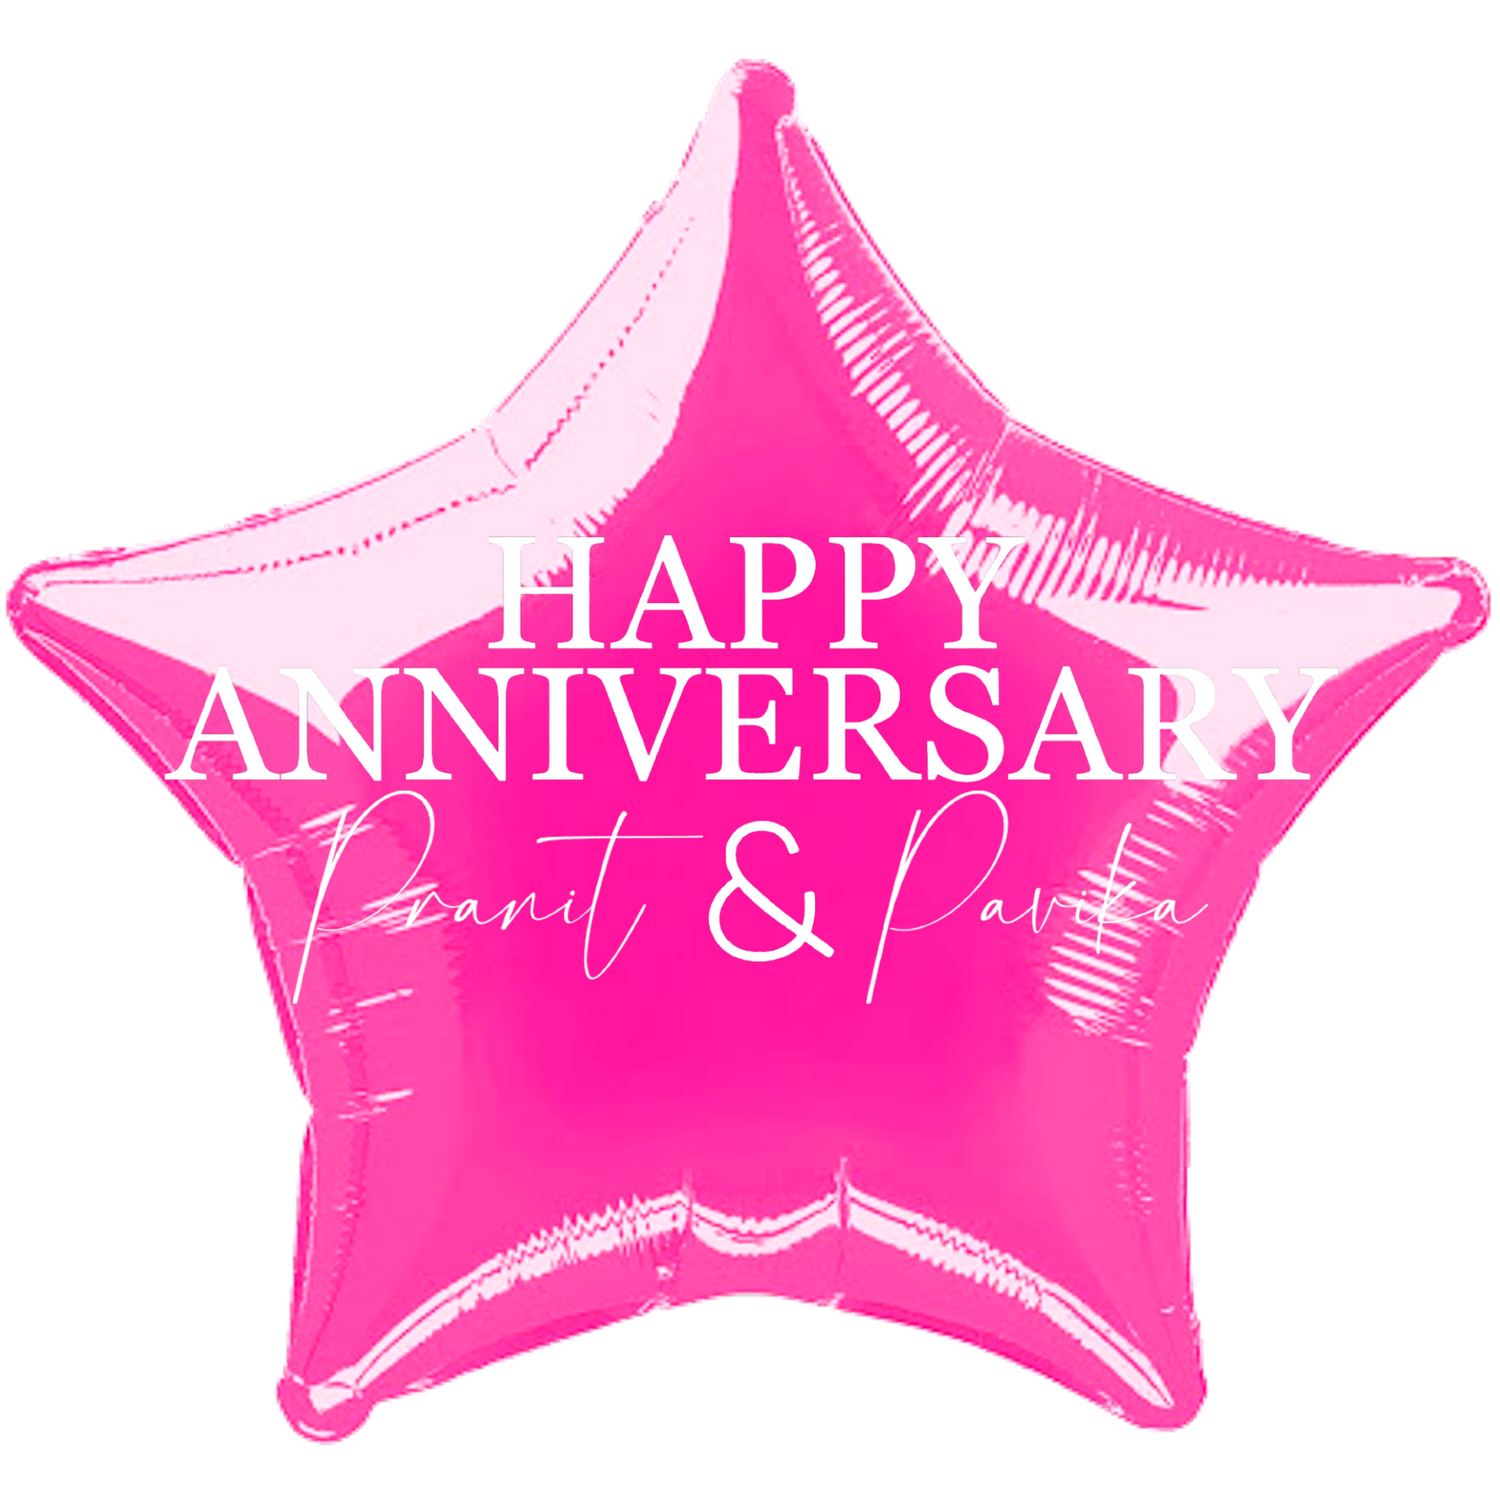 Custom Name/Text/Message Hot Pink Star Balloons For First Wedding Anniversary, 2nd/3rd/5th/10th/15th/20th/25th/30th/35th/40th/45th/50th/55th/60th/65th/75th Marriage Anniversary And Wedding Milestones. Supports Helium/Air, Luxury Bespoke Balloons Make Perfect Decoration Supplies & Surprise For Your Husband/Wife/Partner/Other-Half.